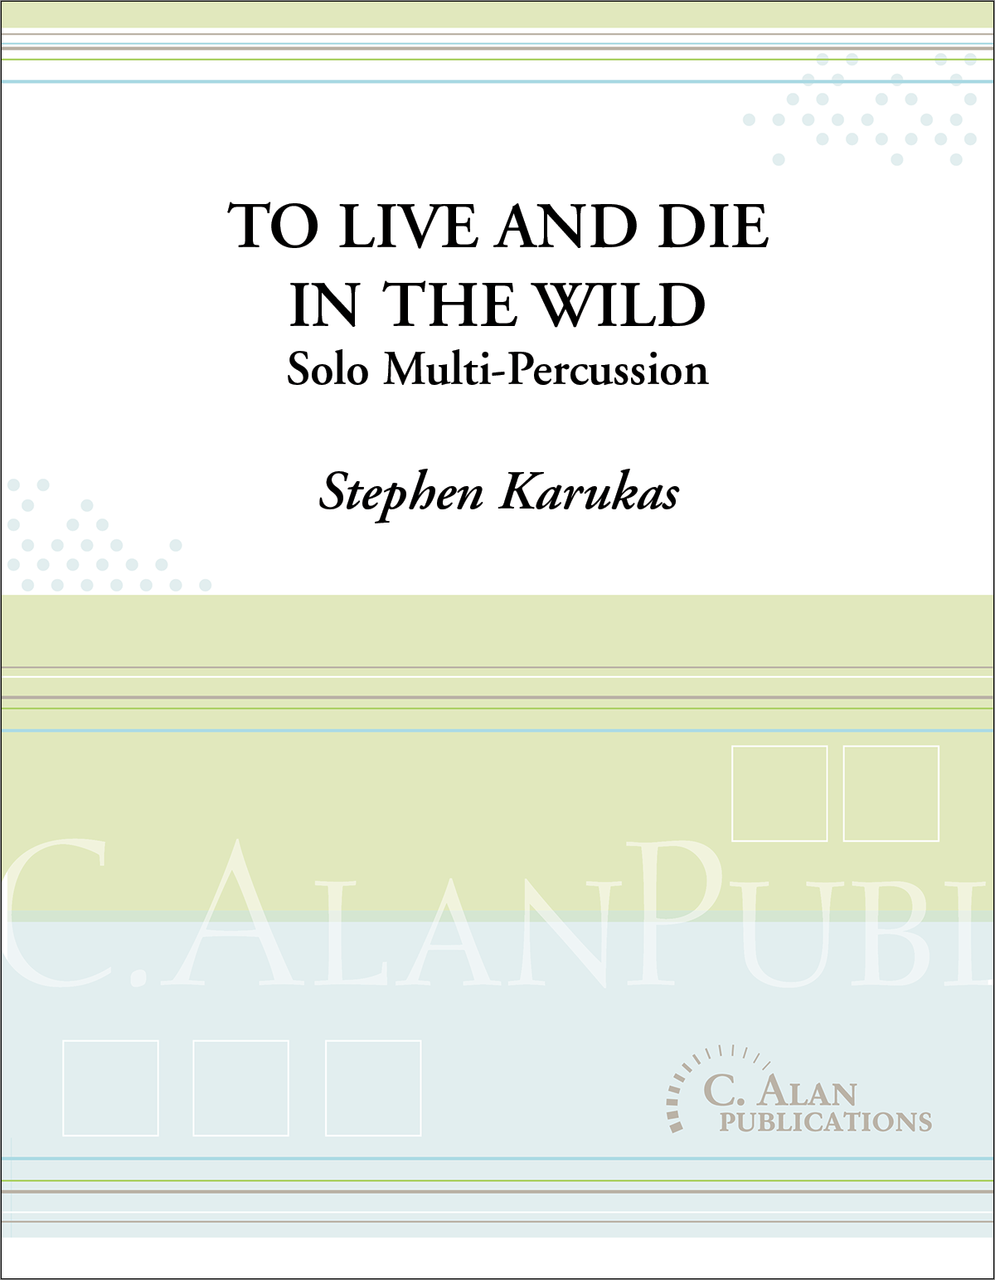 To Live and Die in the Wild by Stephen Karukas